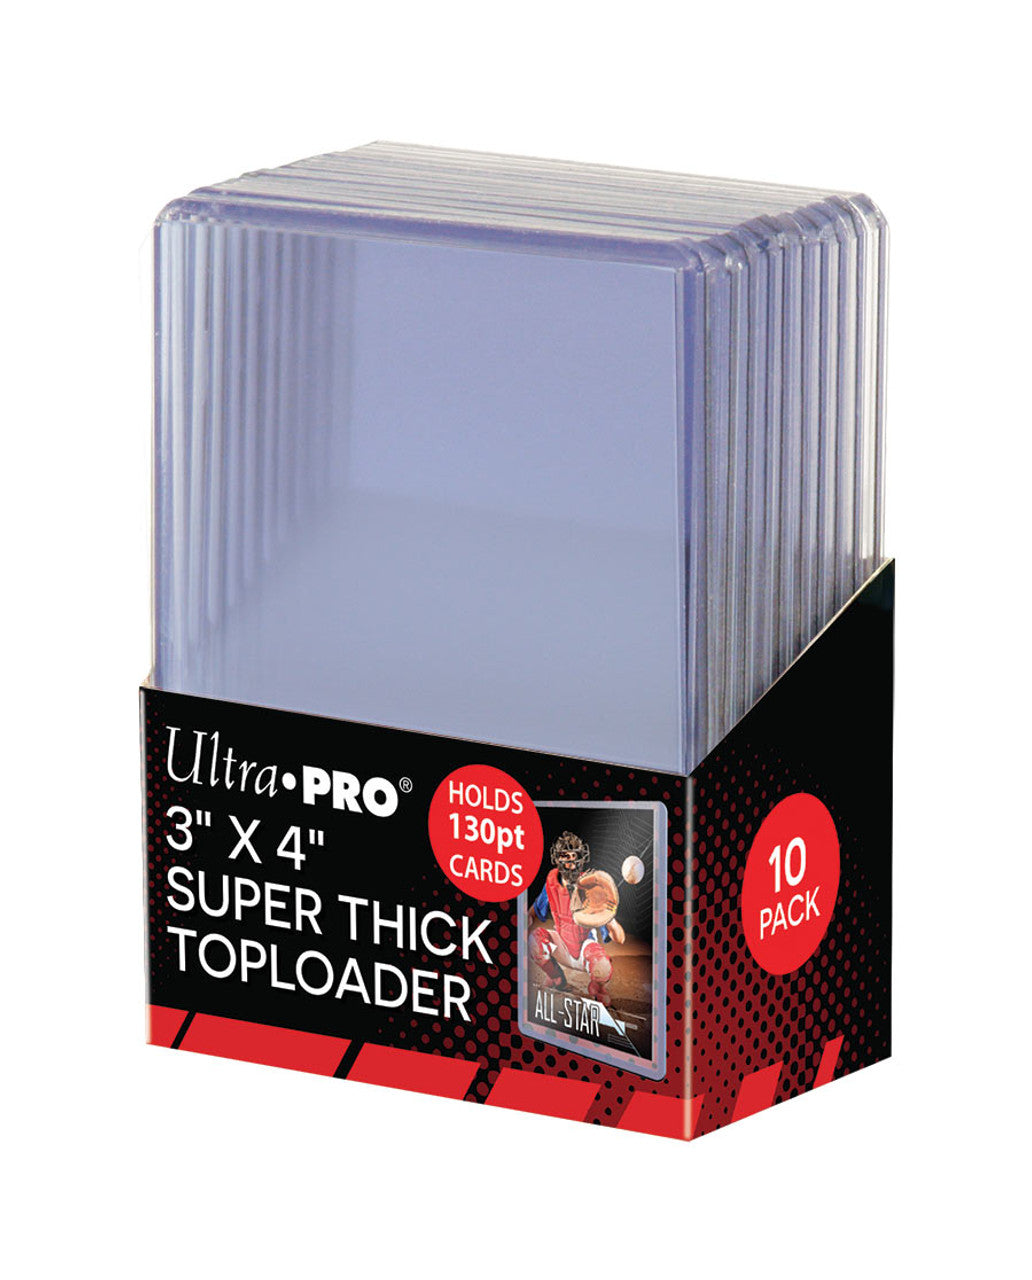 Ultra Pro 130 point Top Loader